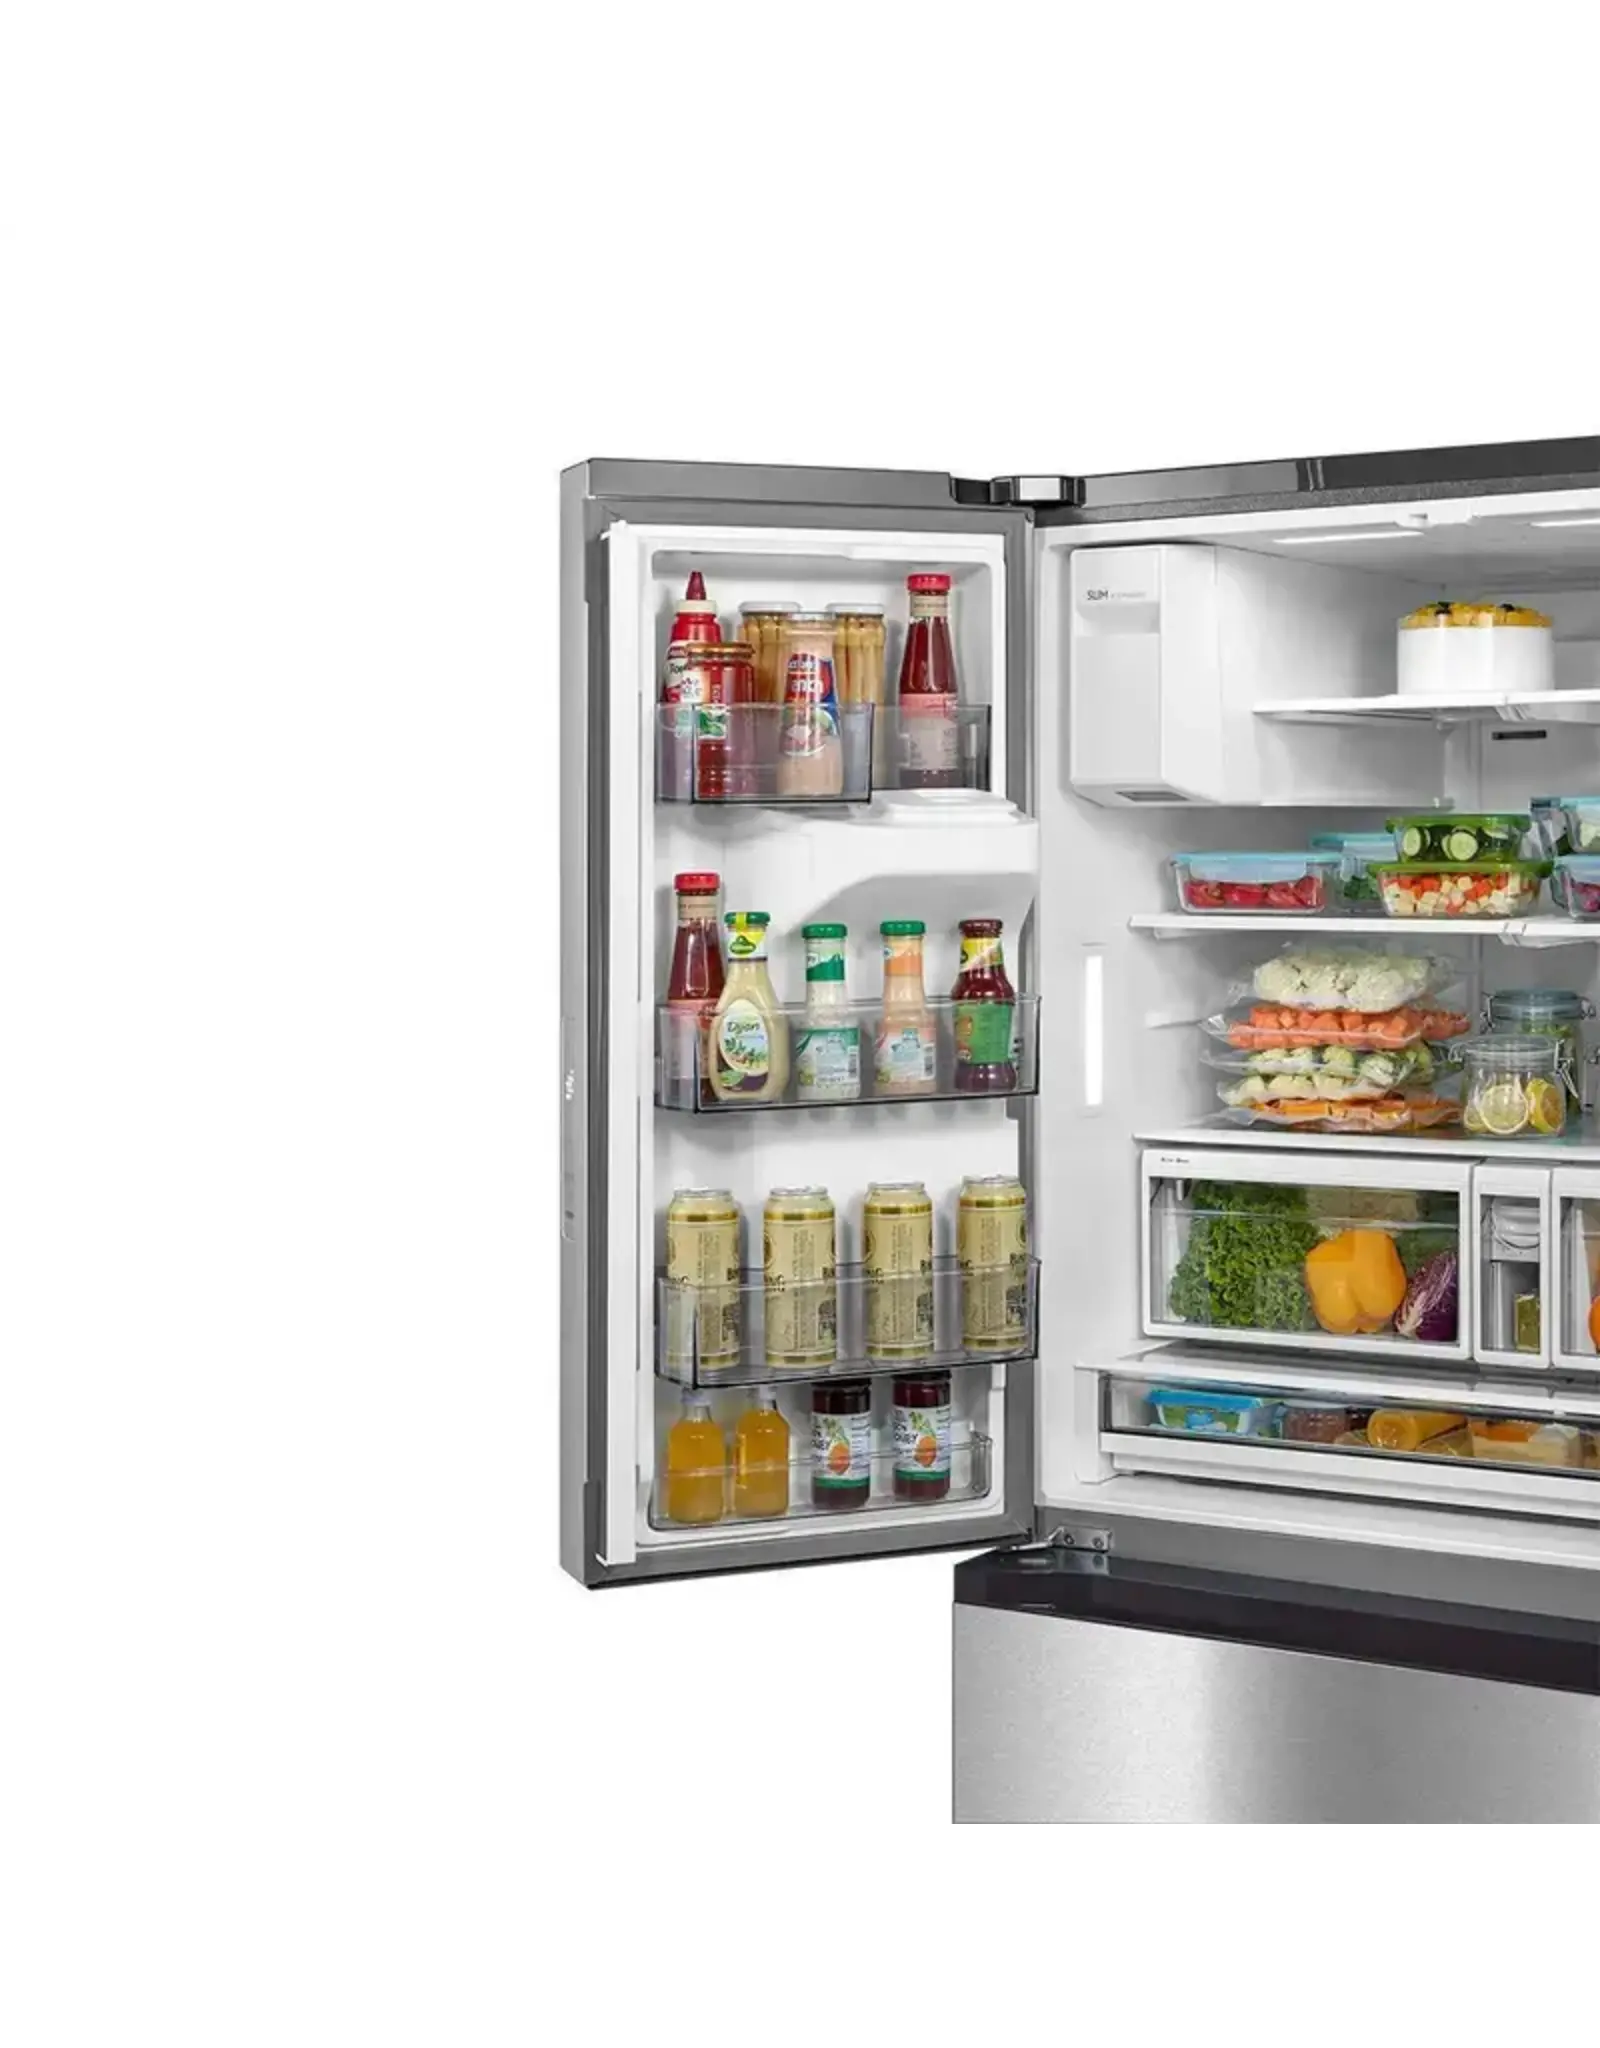 Midea Midea 29.3-cu ft Smart French Door Refrigerator with Dual Ice Maker, Water and Ice Dispenser (Stainless Steel) ENERGY STAR